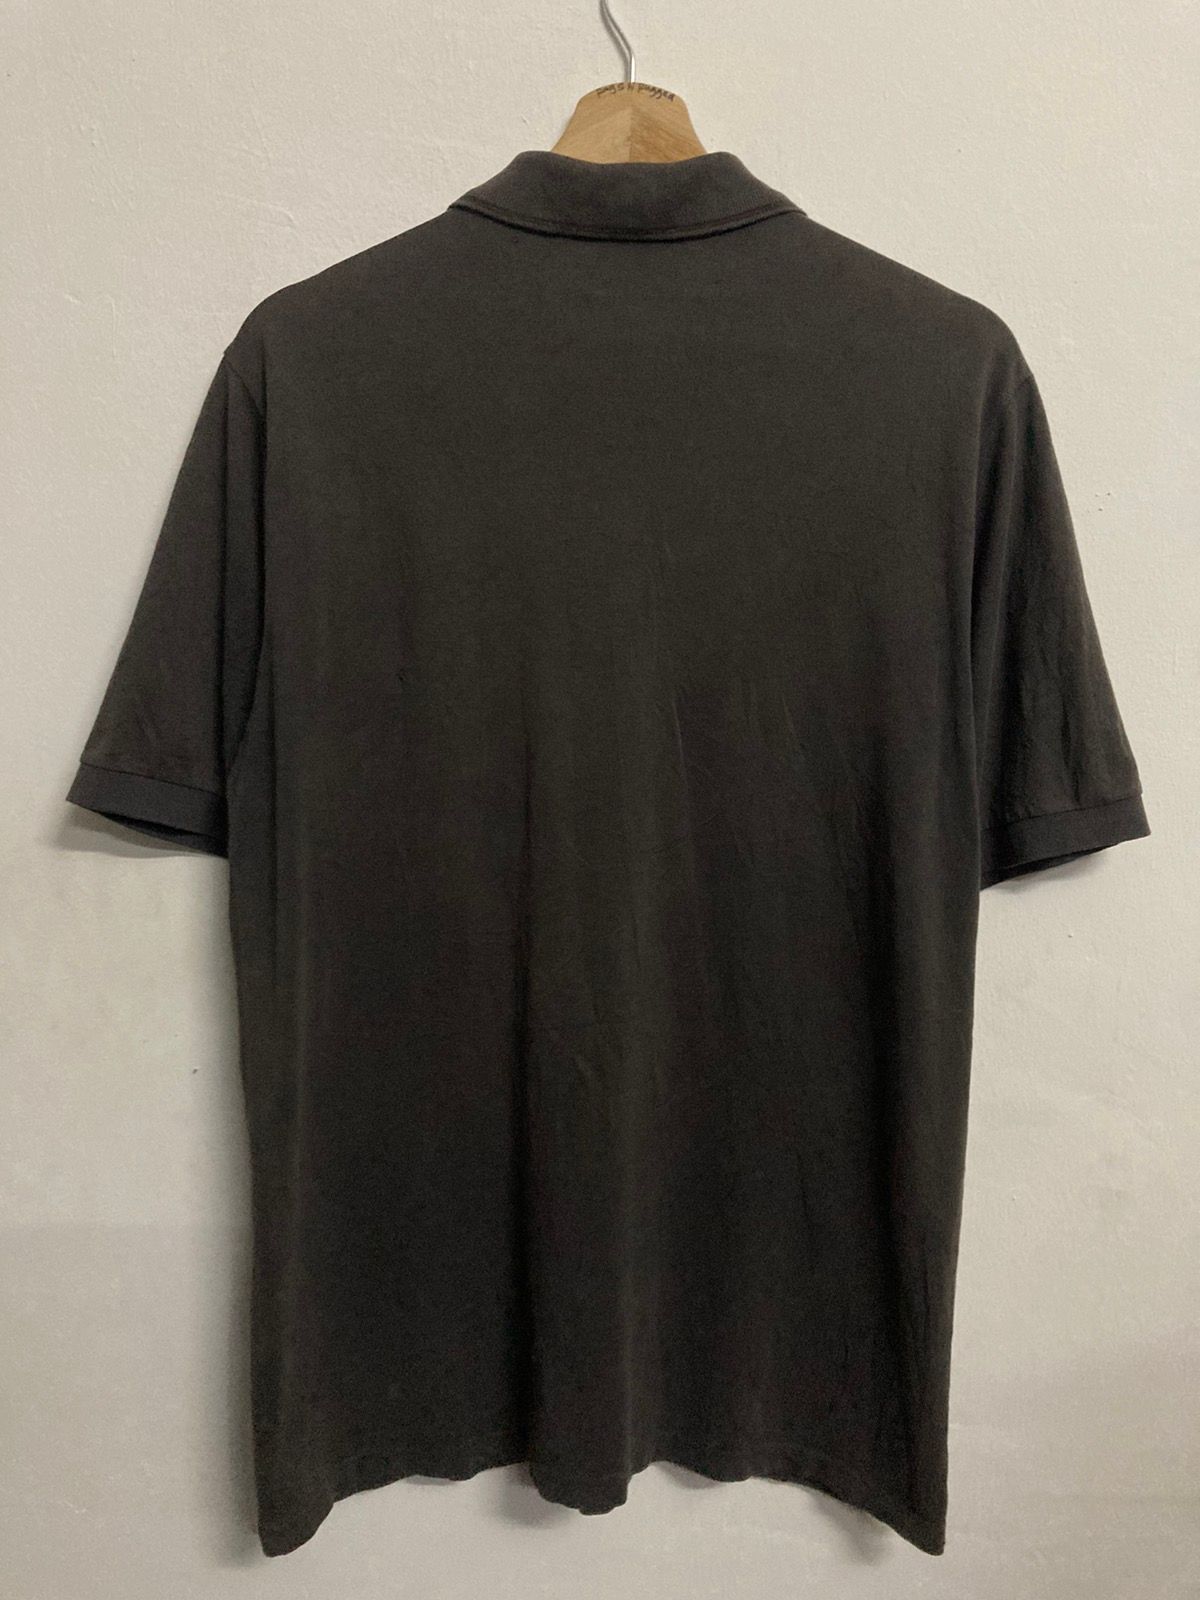 Authentic Gucci Polo T-shirt - 2